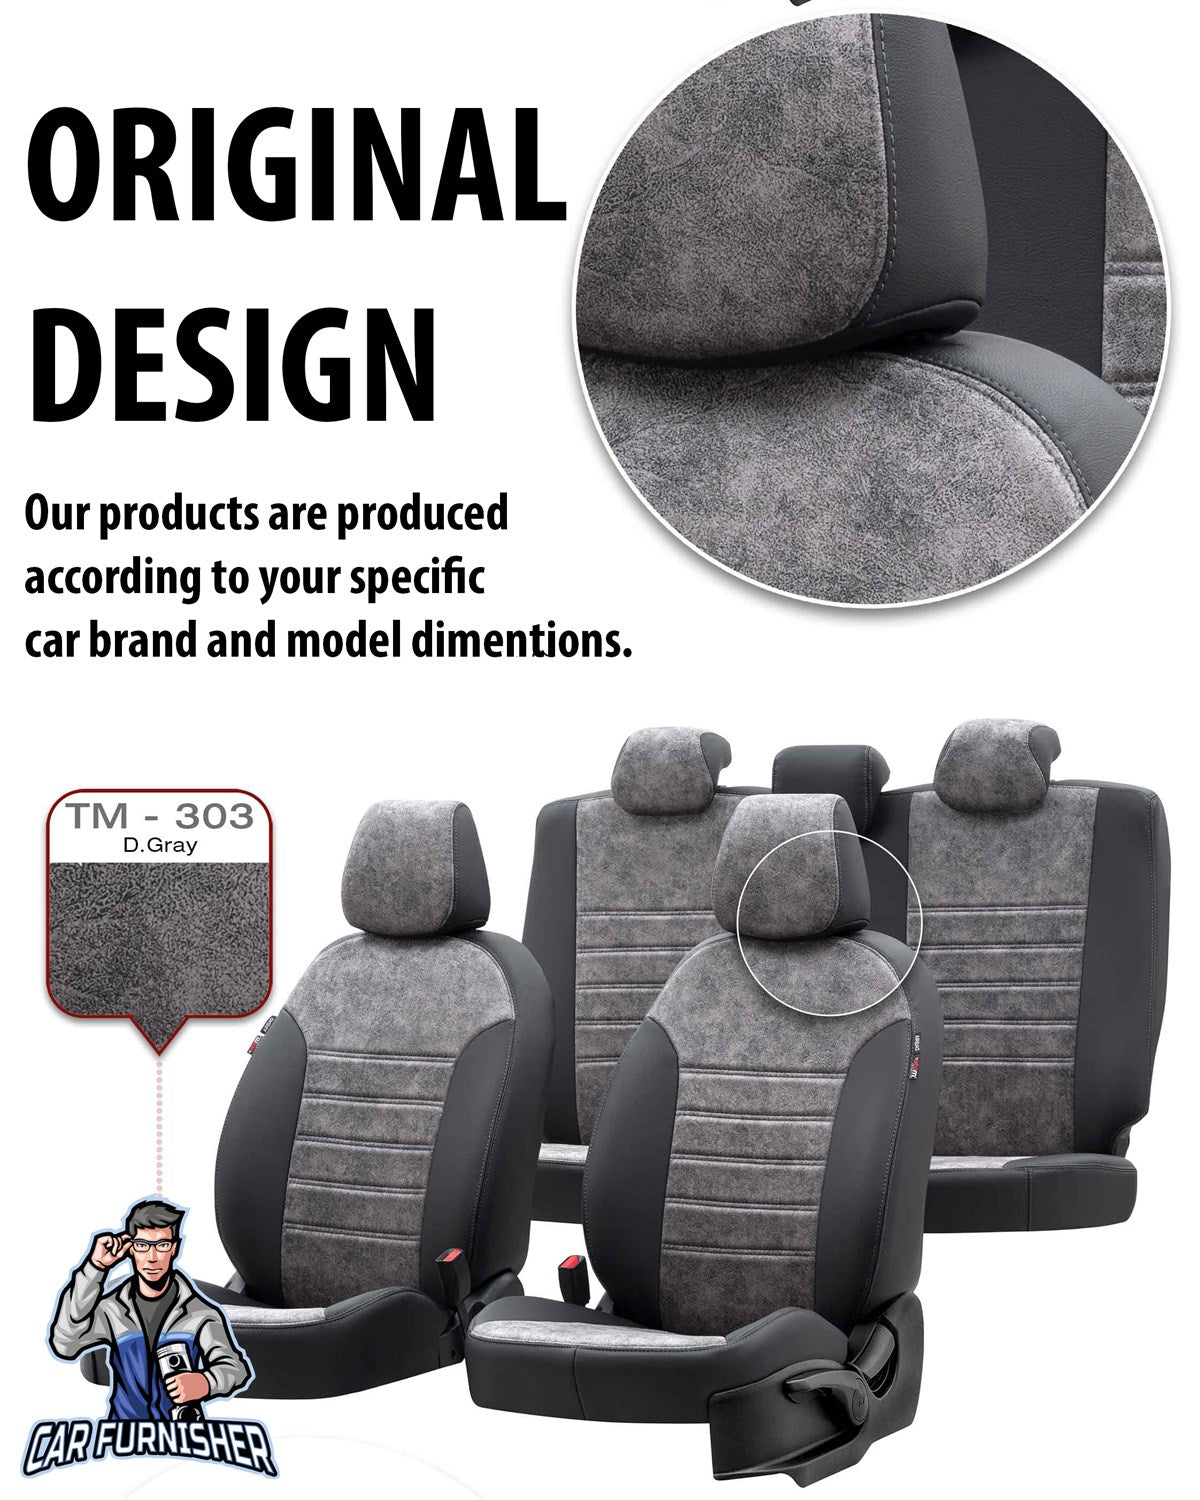 Mitsubishi Spacestar Seat Cover Milano Suede Design Ivory Leather & Suede Fabric